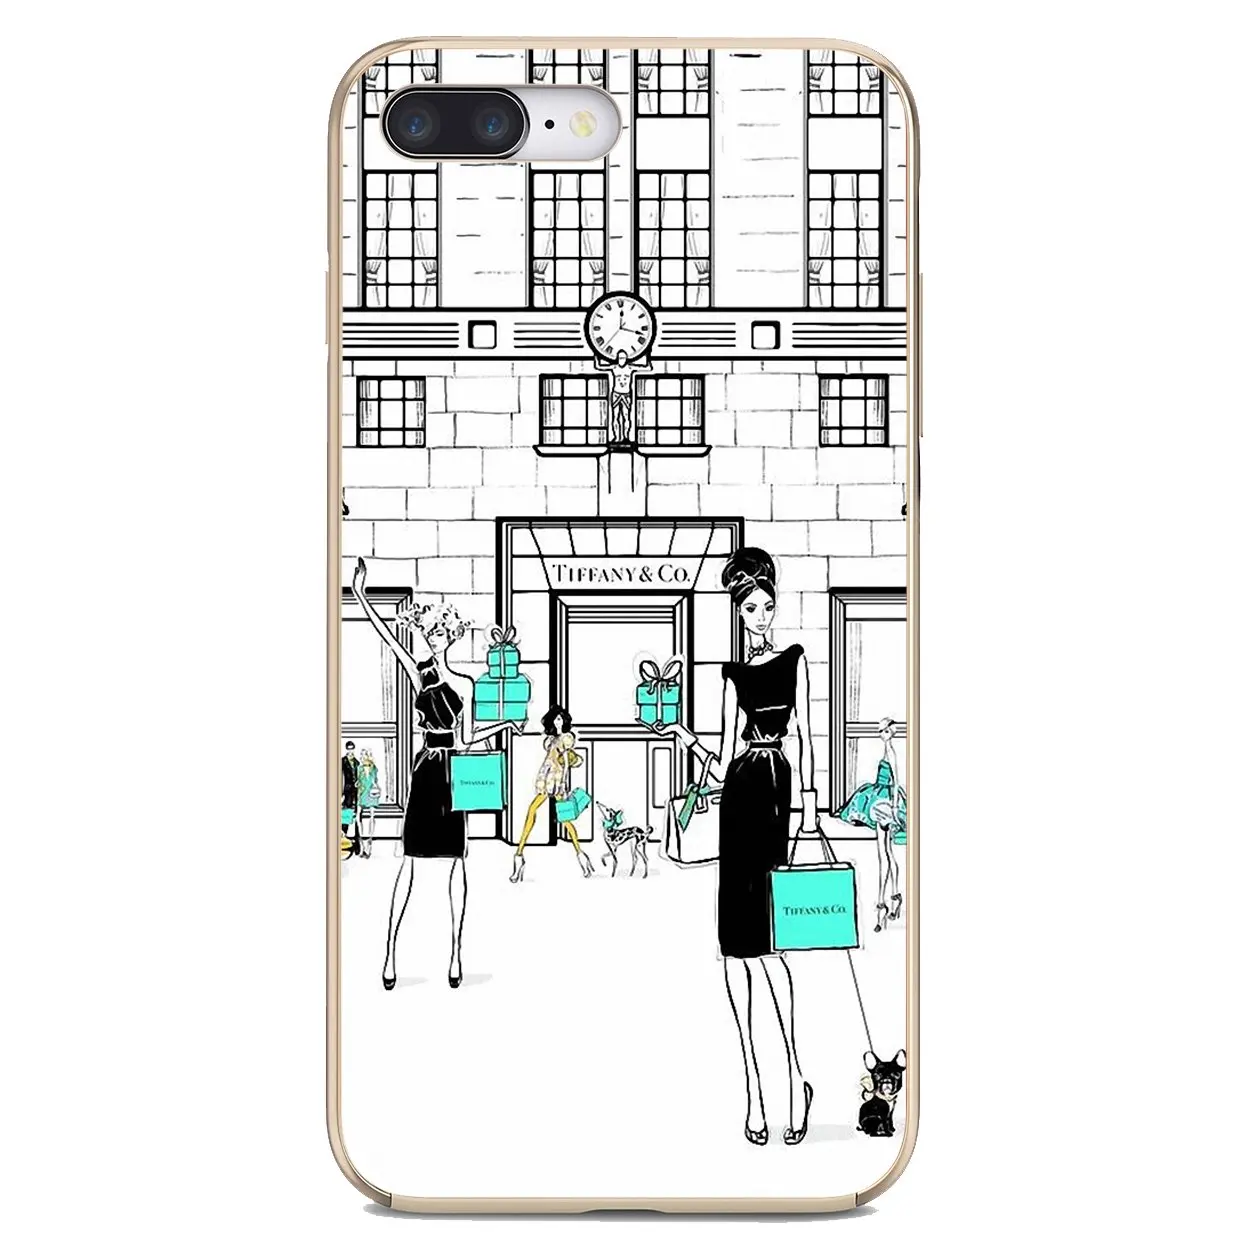 TPU Transparent Skin Cover For Samsung Galaxy Note 3 4 5 8 9 10 S3 S4 S5 Mini S6 S7 Edge S8 S9 Plus Sex-and-the-City-American-TV images - 6